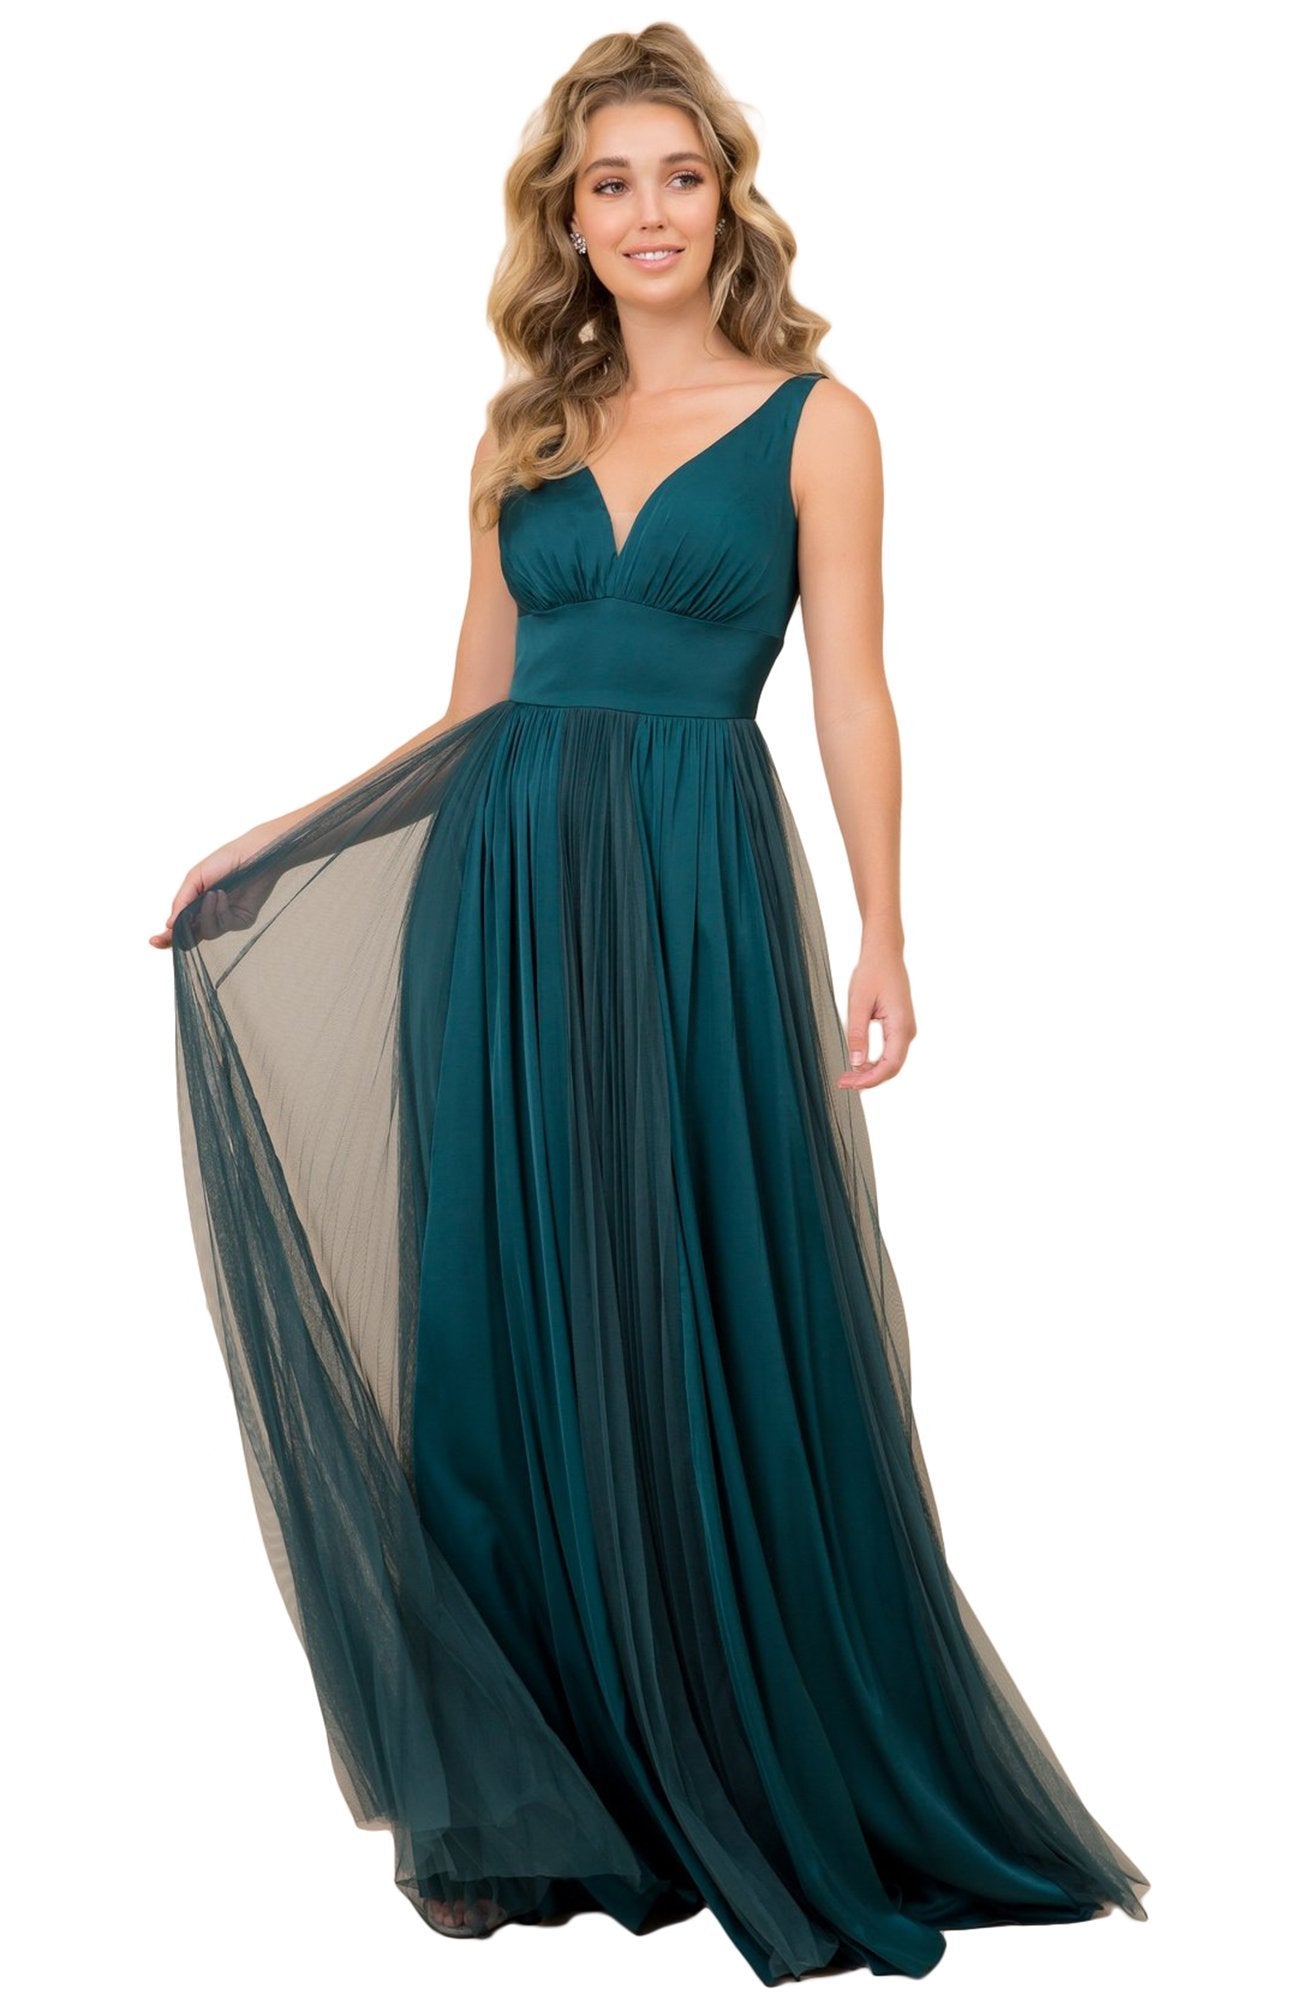 Nox Anabel - Plunging V-Neck Empire A-Line Evening Dress L340 In Green